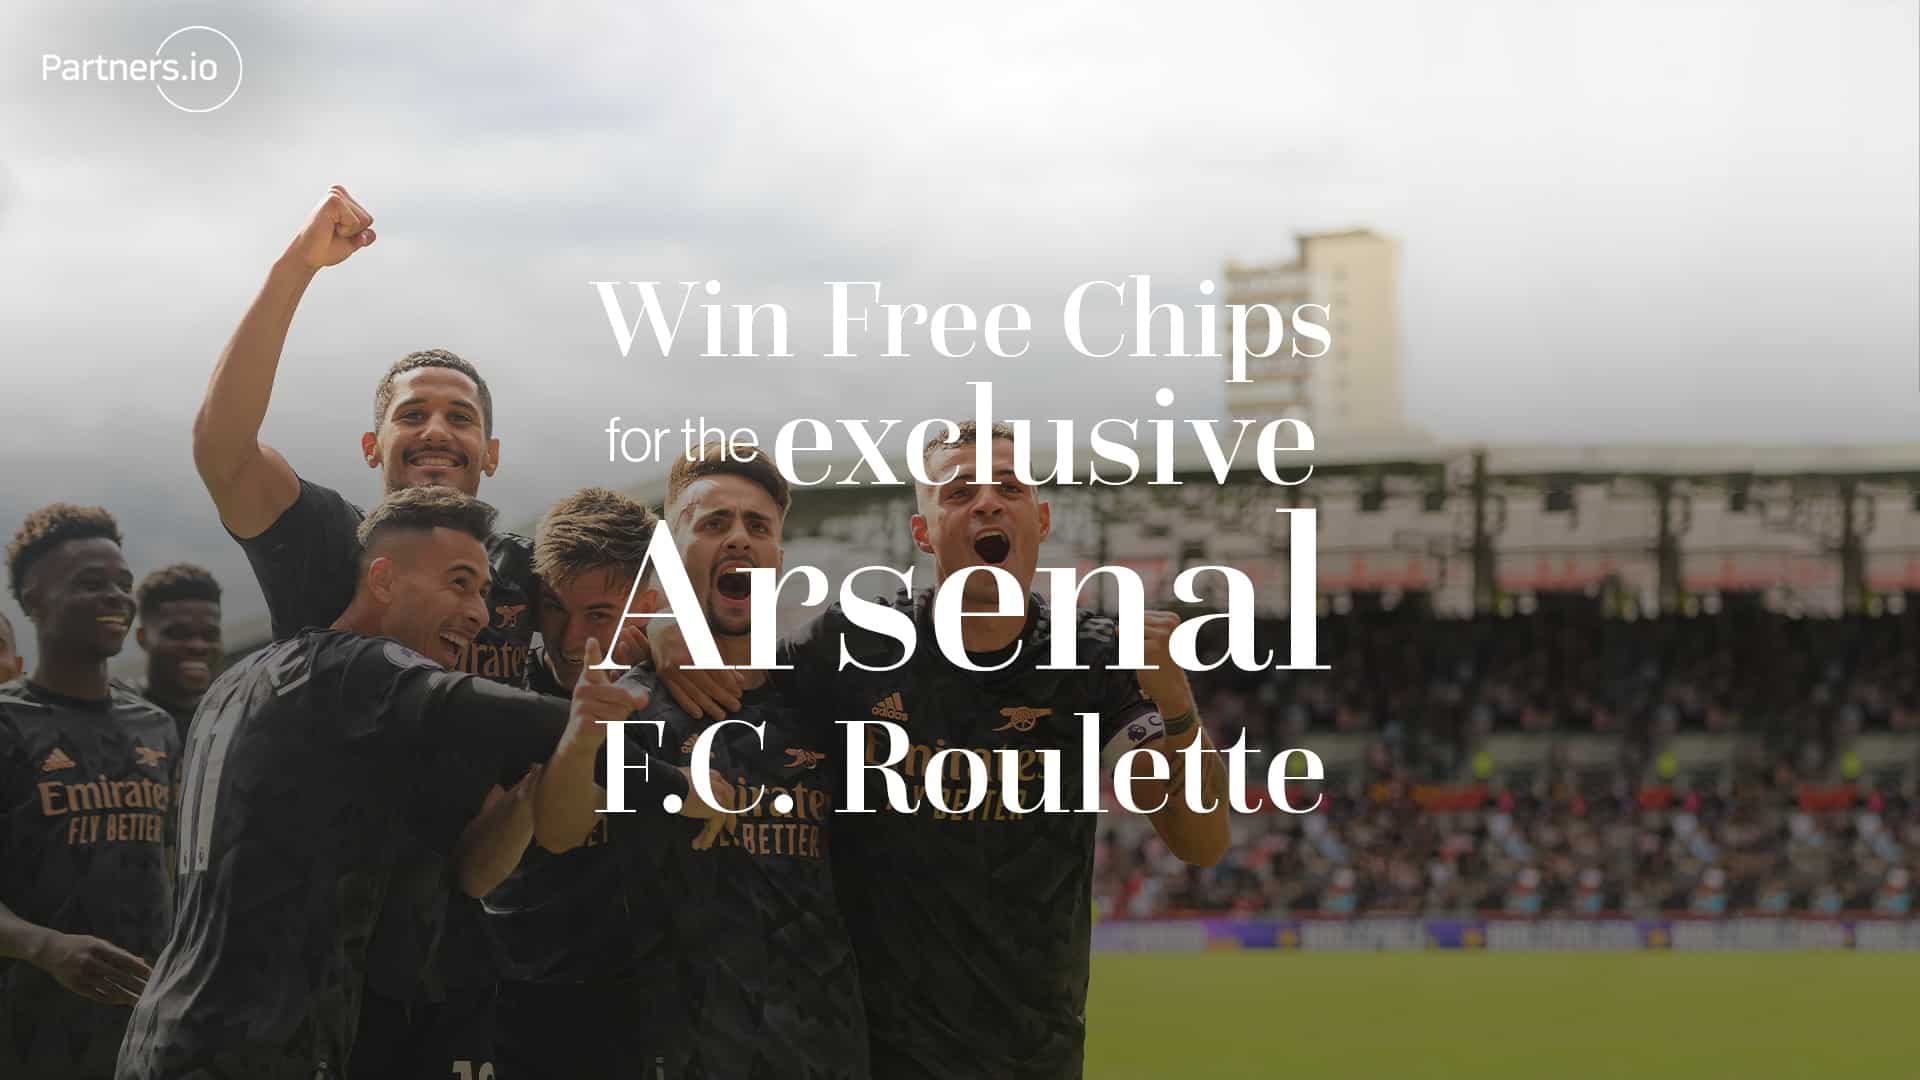 Win Free Chips for the exclusive Arsenal F.C. Roulette